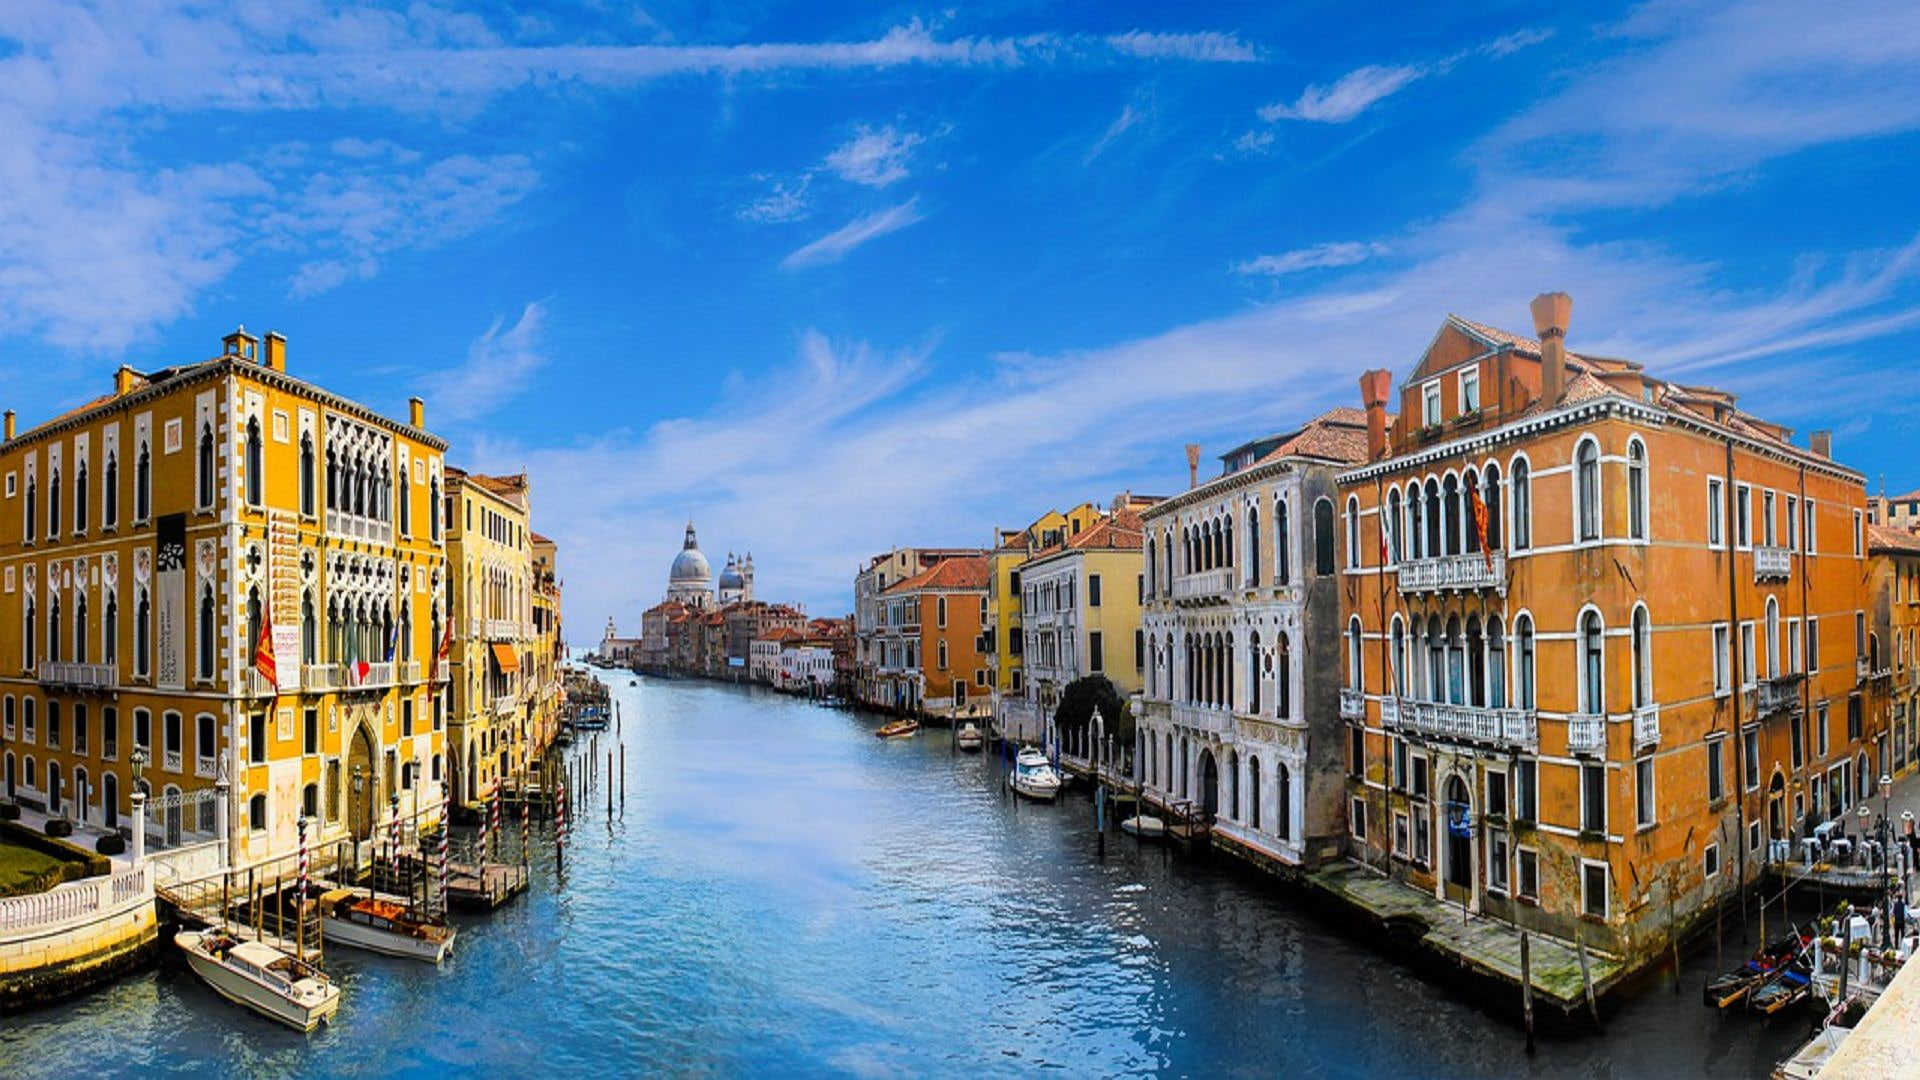 The beautiful venice, building exterior, water, architecture